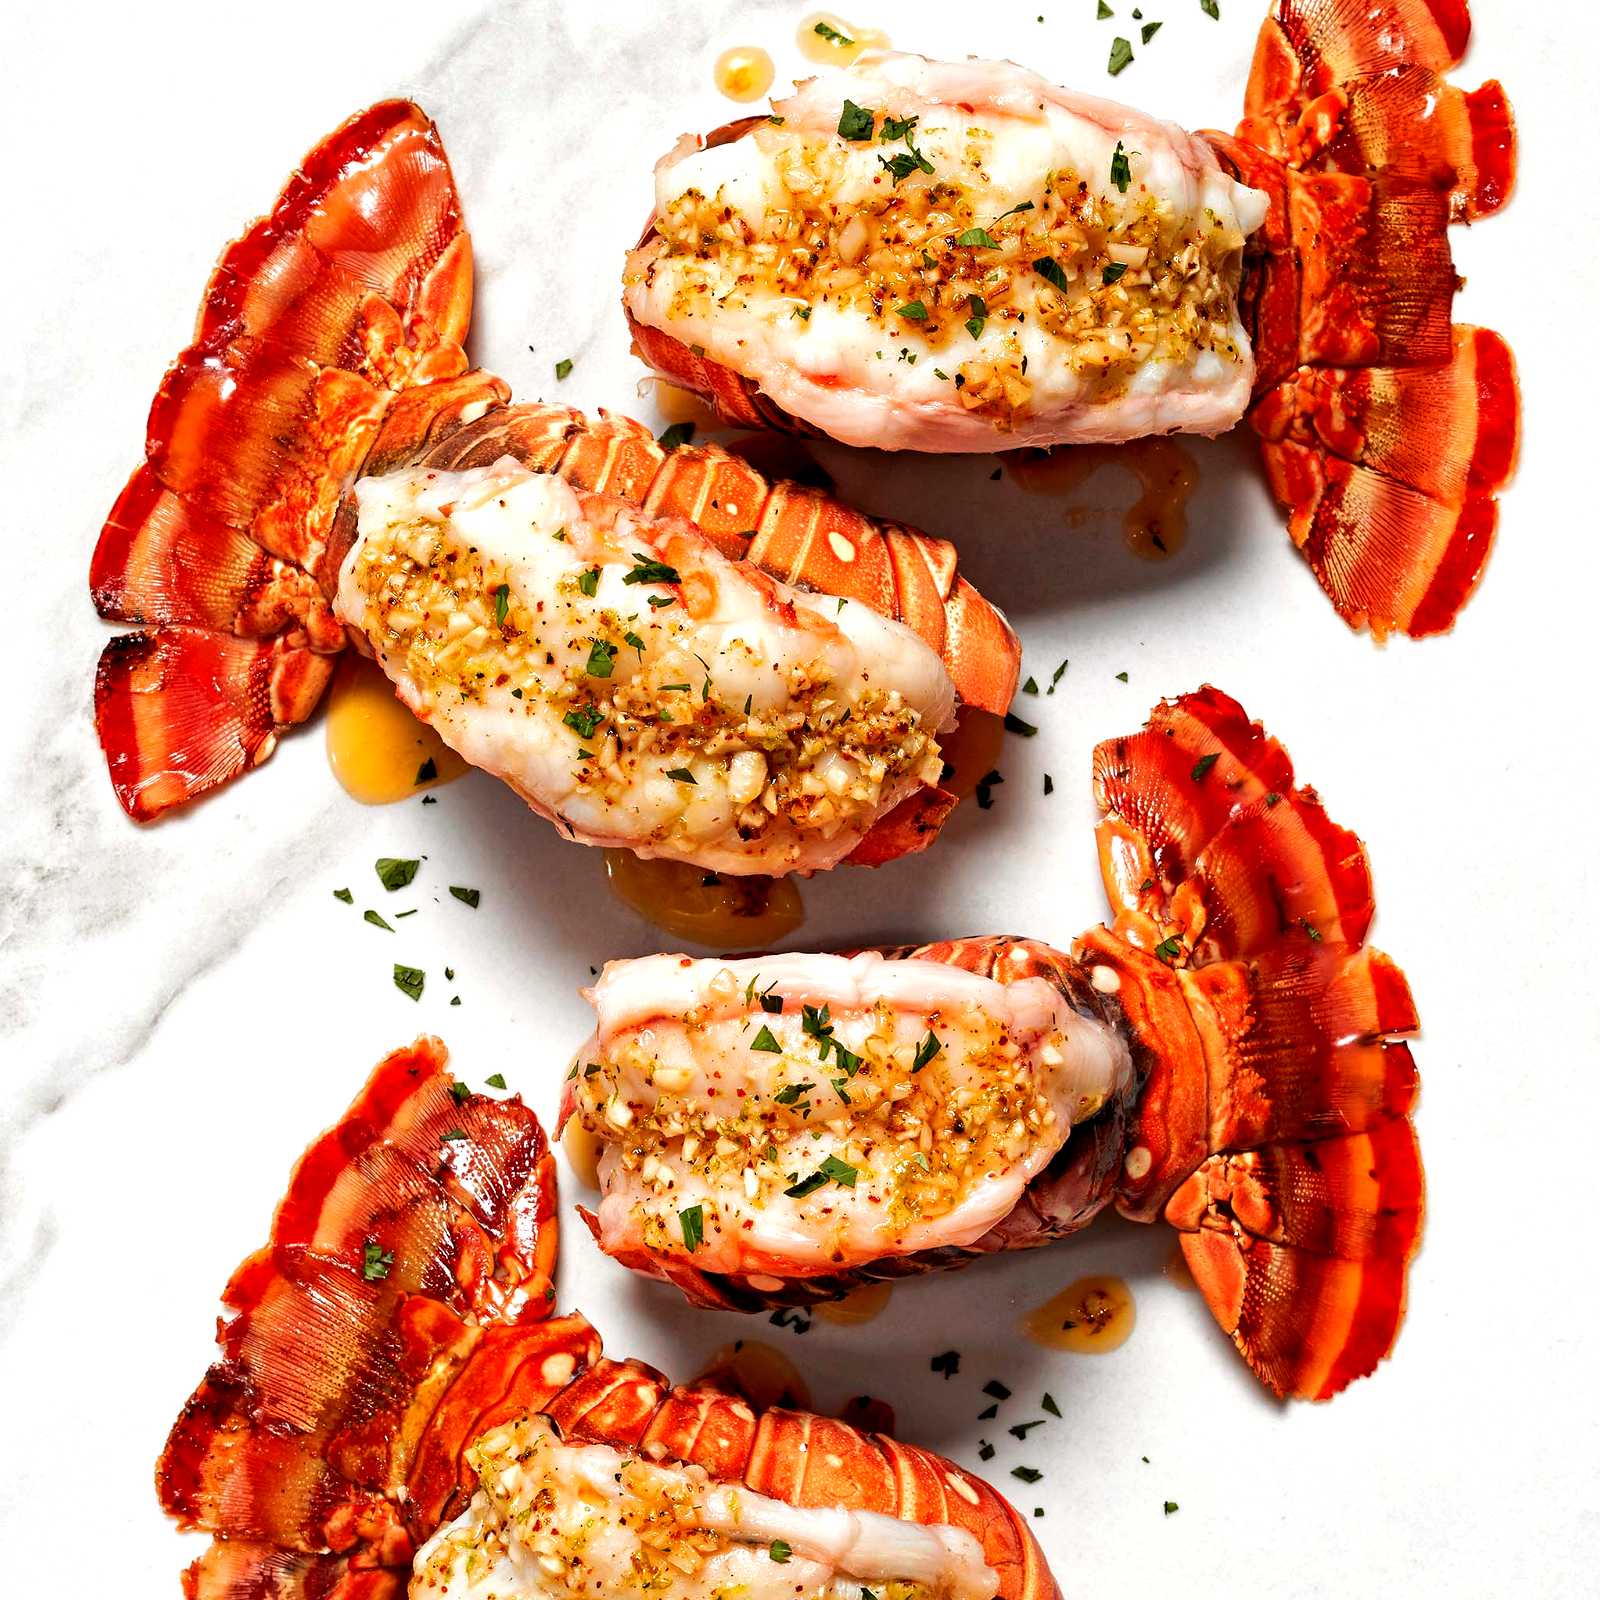 Image of Broiled Spiny Lobster Tail with Key West Garlic Butter